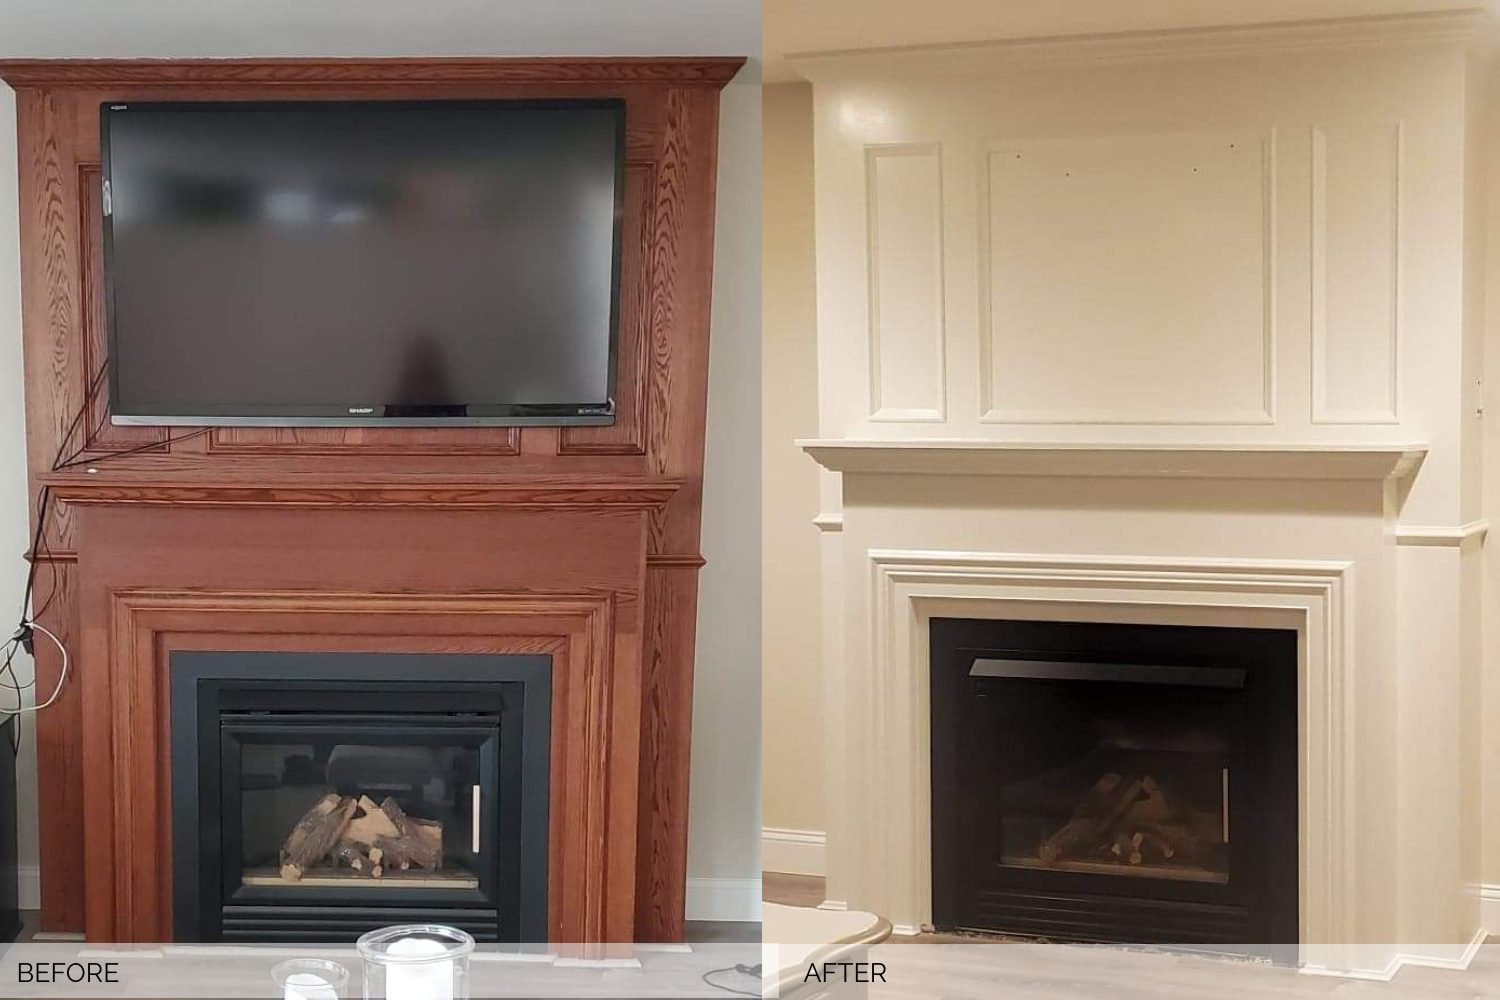 Living Room Remodel, Before/After fireplace